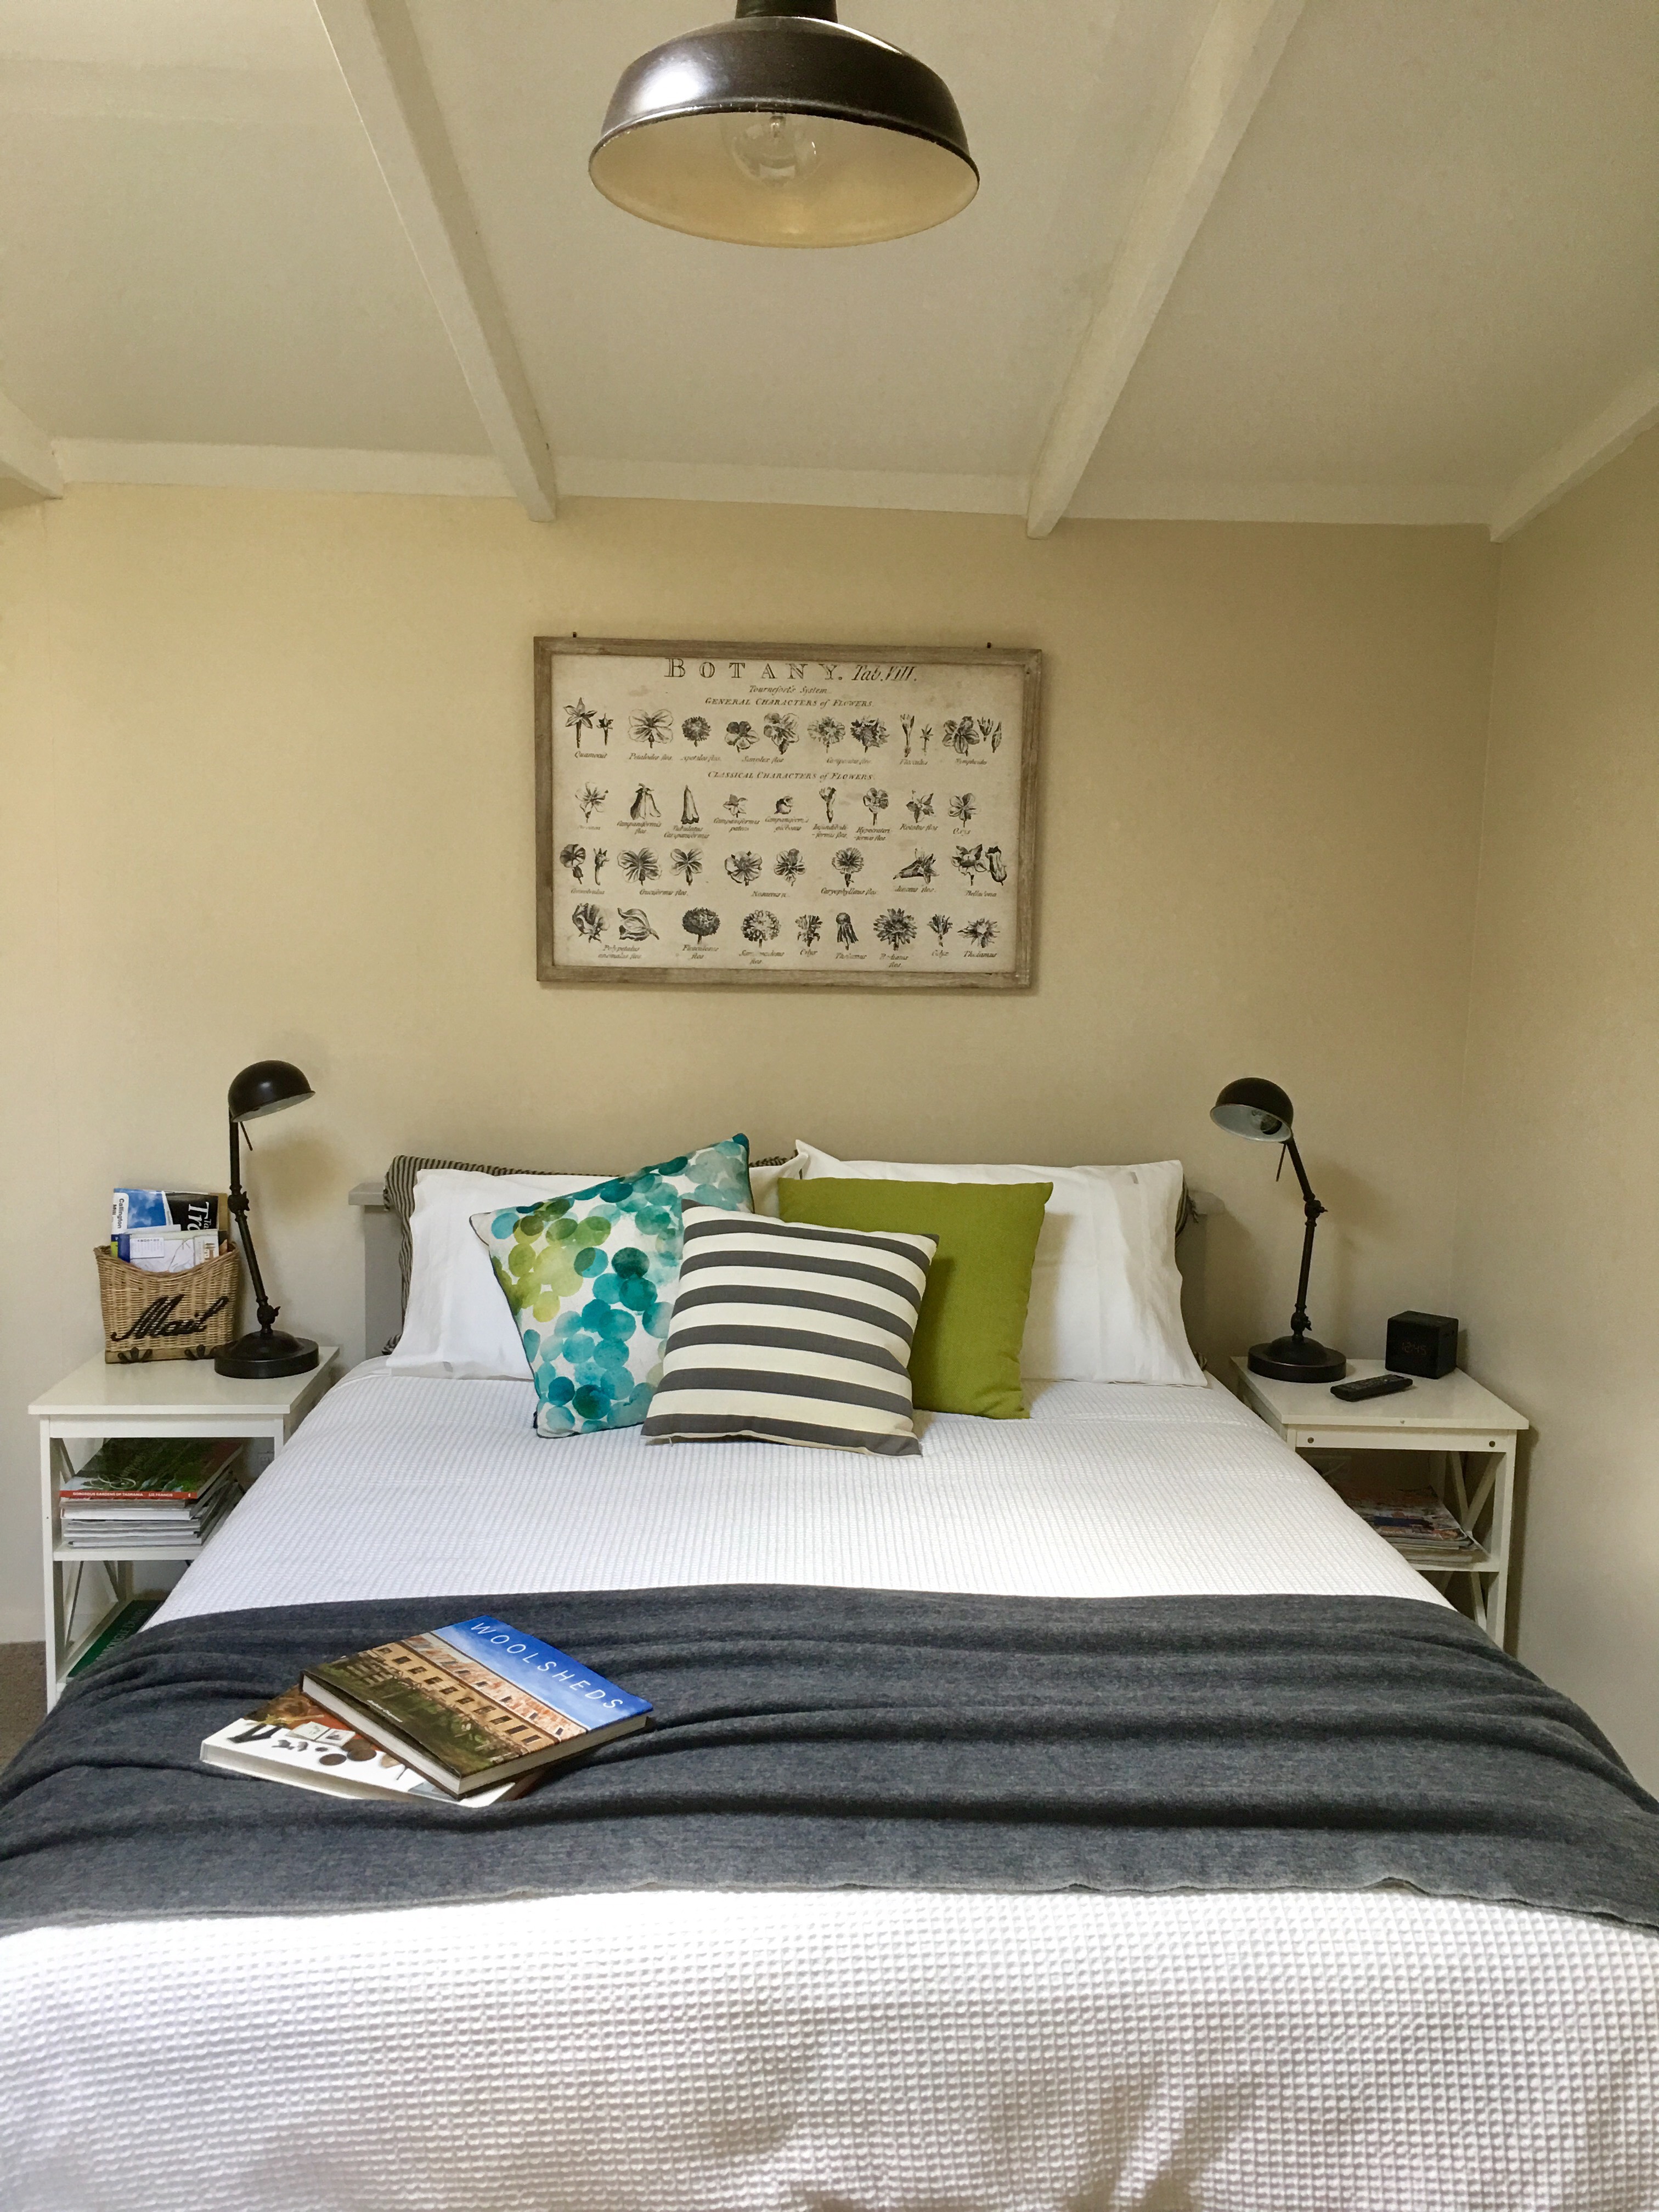 Aggies Bed And Breakfast - Accommodation NSW 5